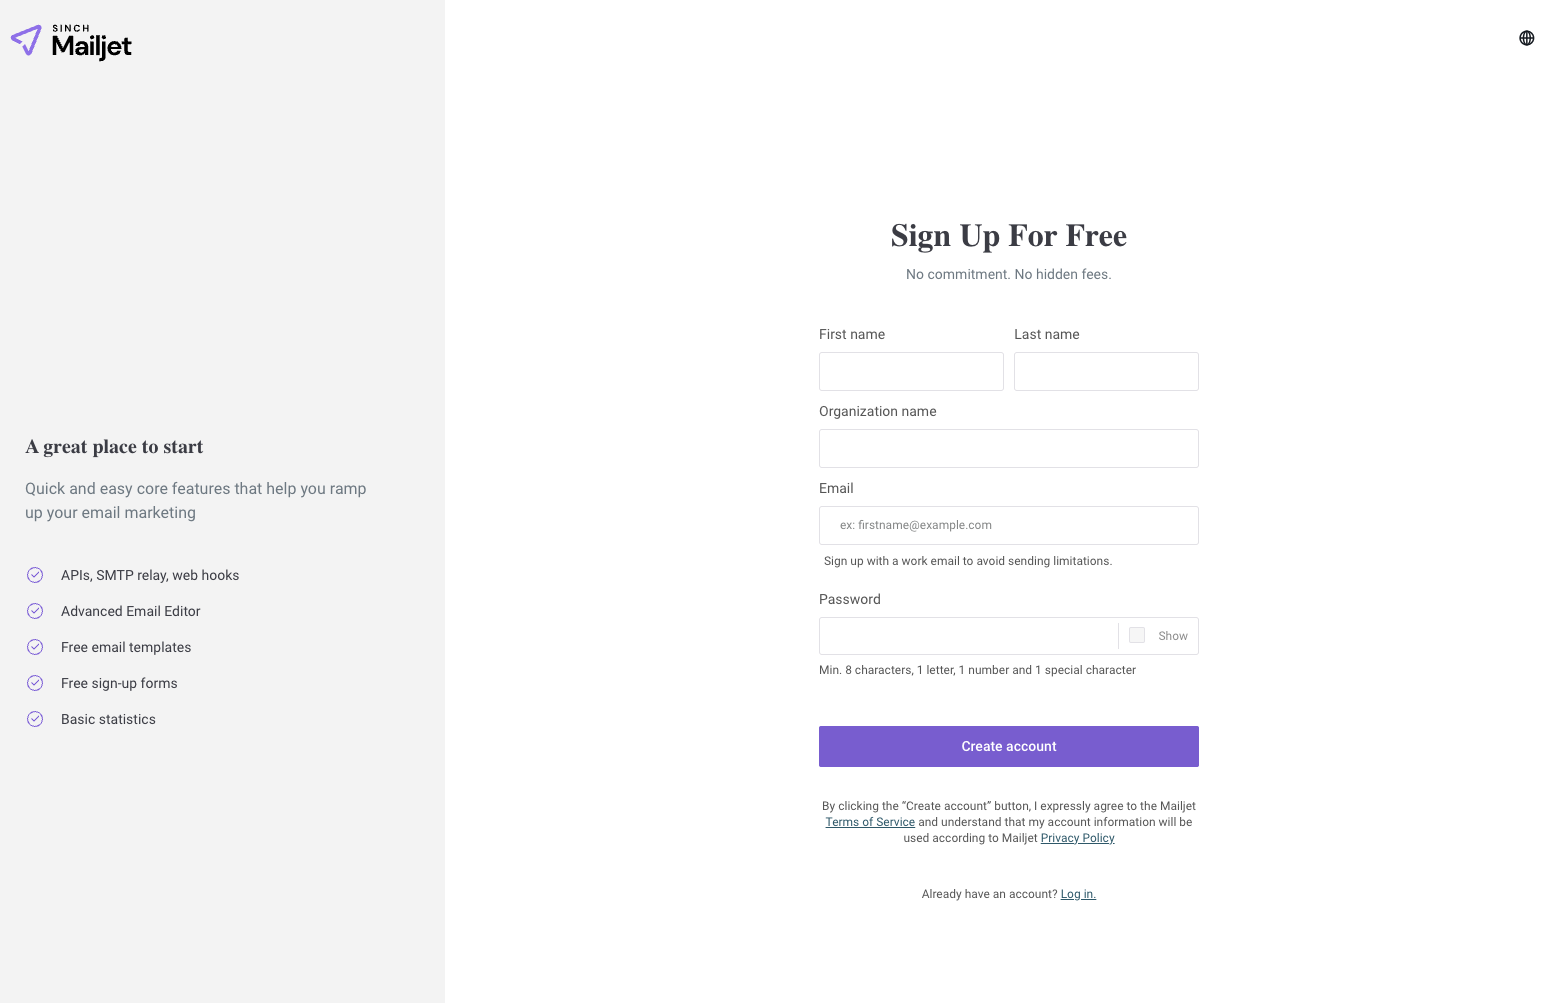 An example “get started” landing page from Sinch Mailjet